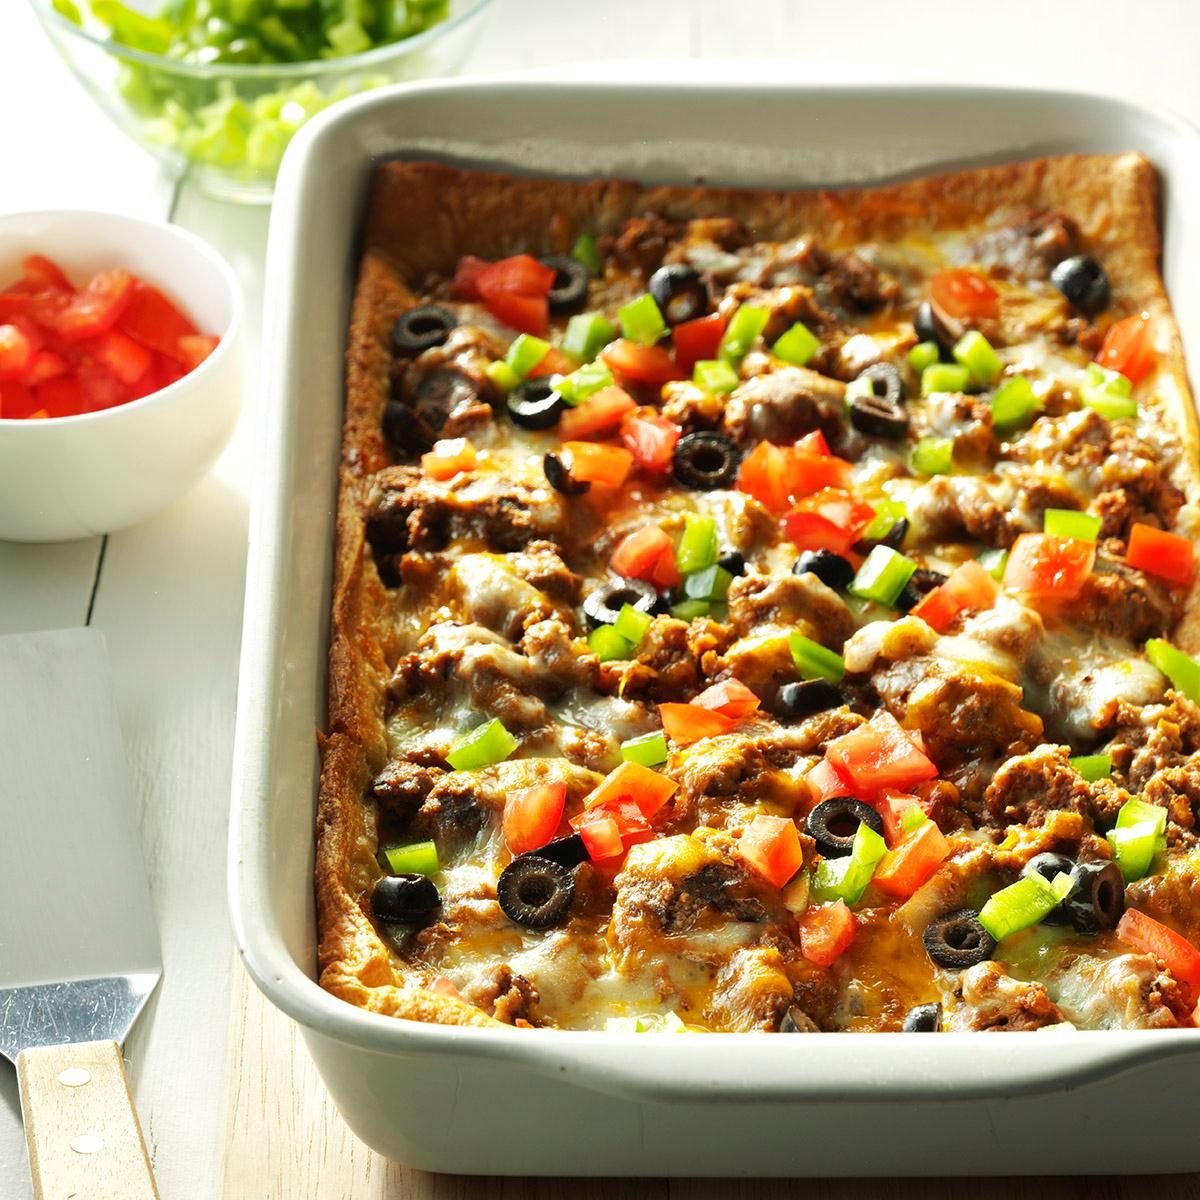 <p>Back when I was in college, my roommate would frequently make this economical baked burrito casserole. It's so easy to put together, and one serving goes a long way. —Cindee Ness, Horace, North Dakota</p> <p class="listicle-page__cta-button-shop"><a class="shop-btn" href="https://www.tasteofhome.com/recipes/burrito-bake/">Go to Recipe</a></p>